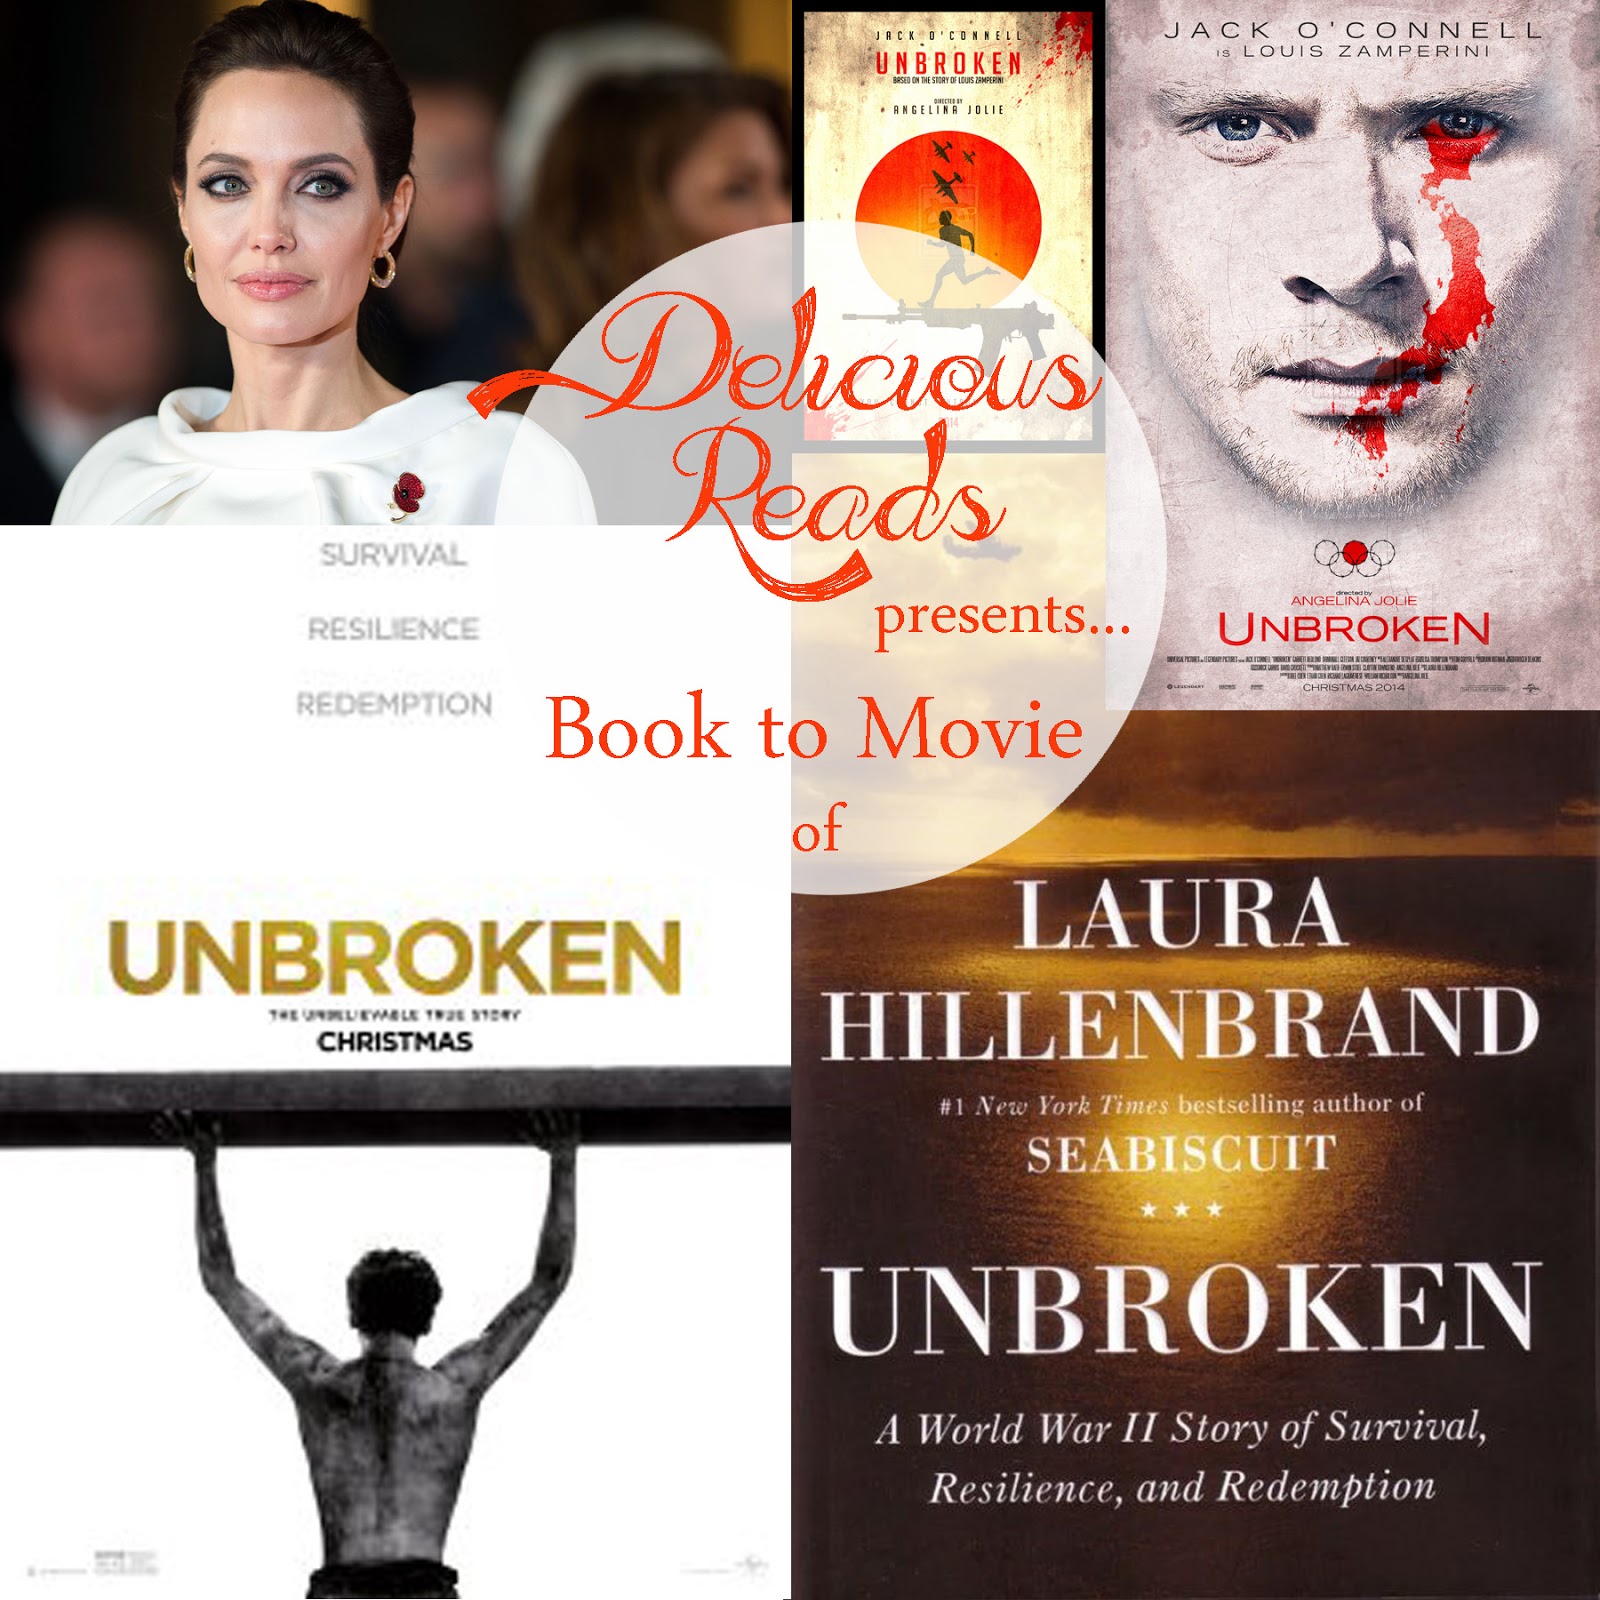 unbroken book review age appropriate